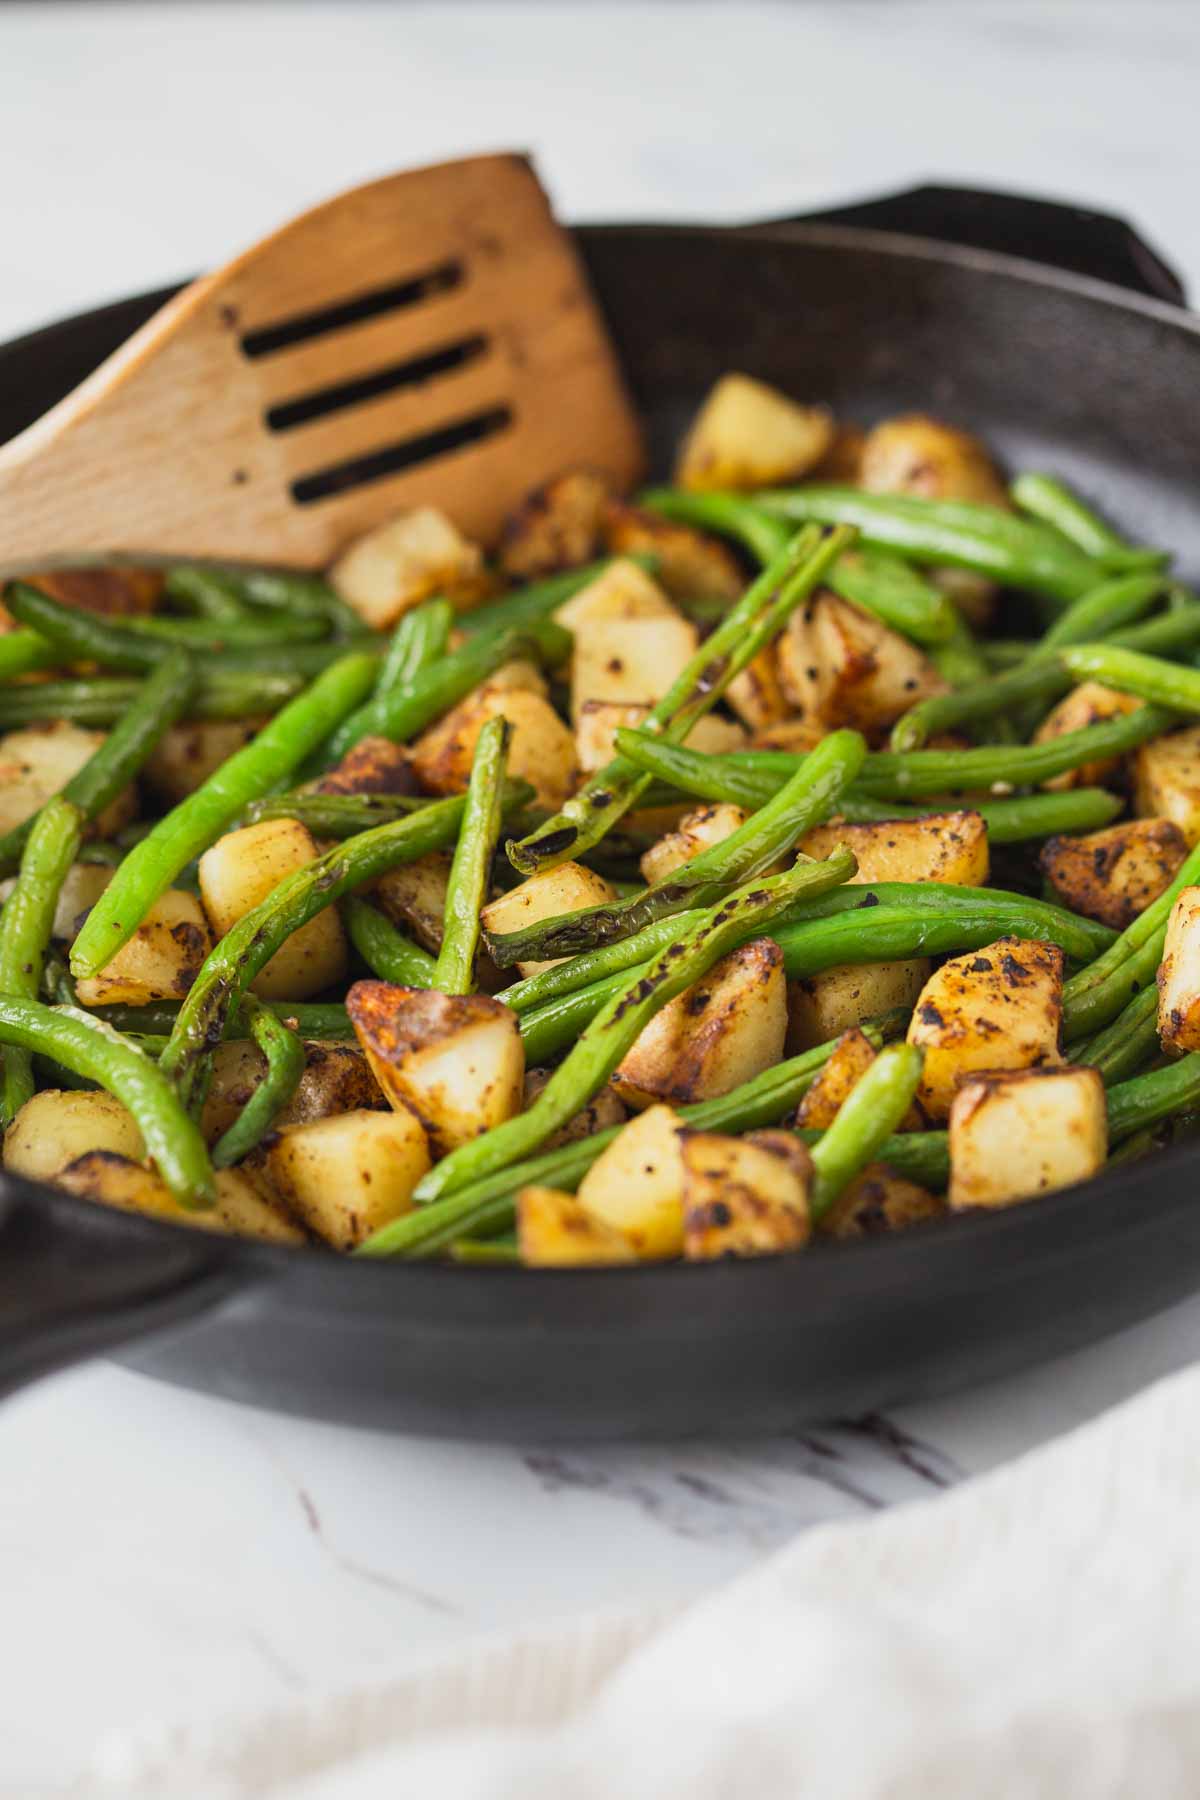 Roasted green beans and potatoes in a cast iron pan after cooking. 